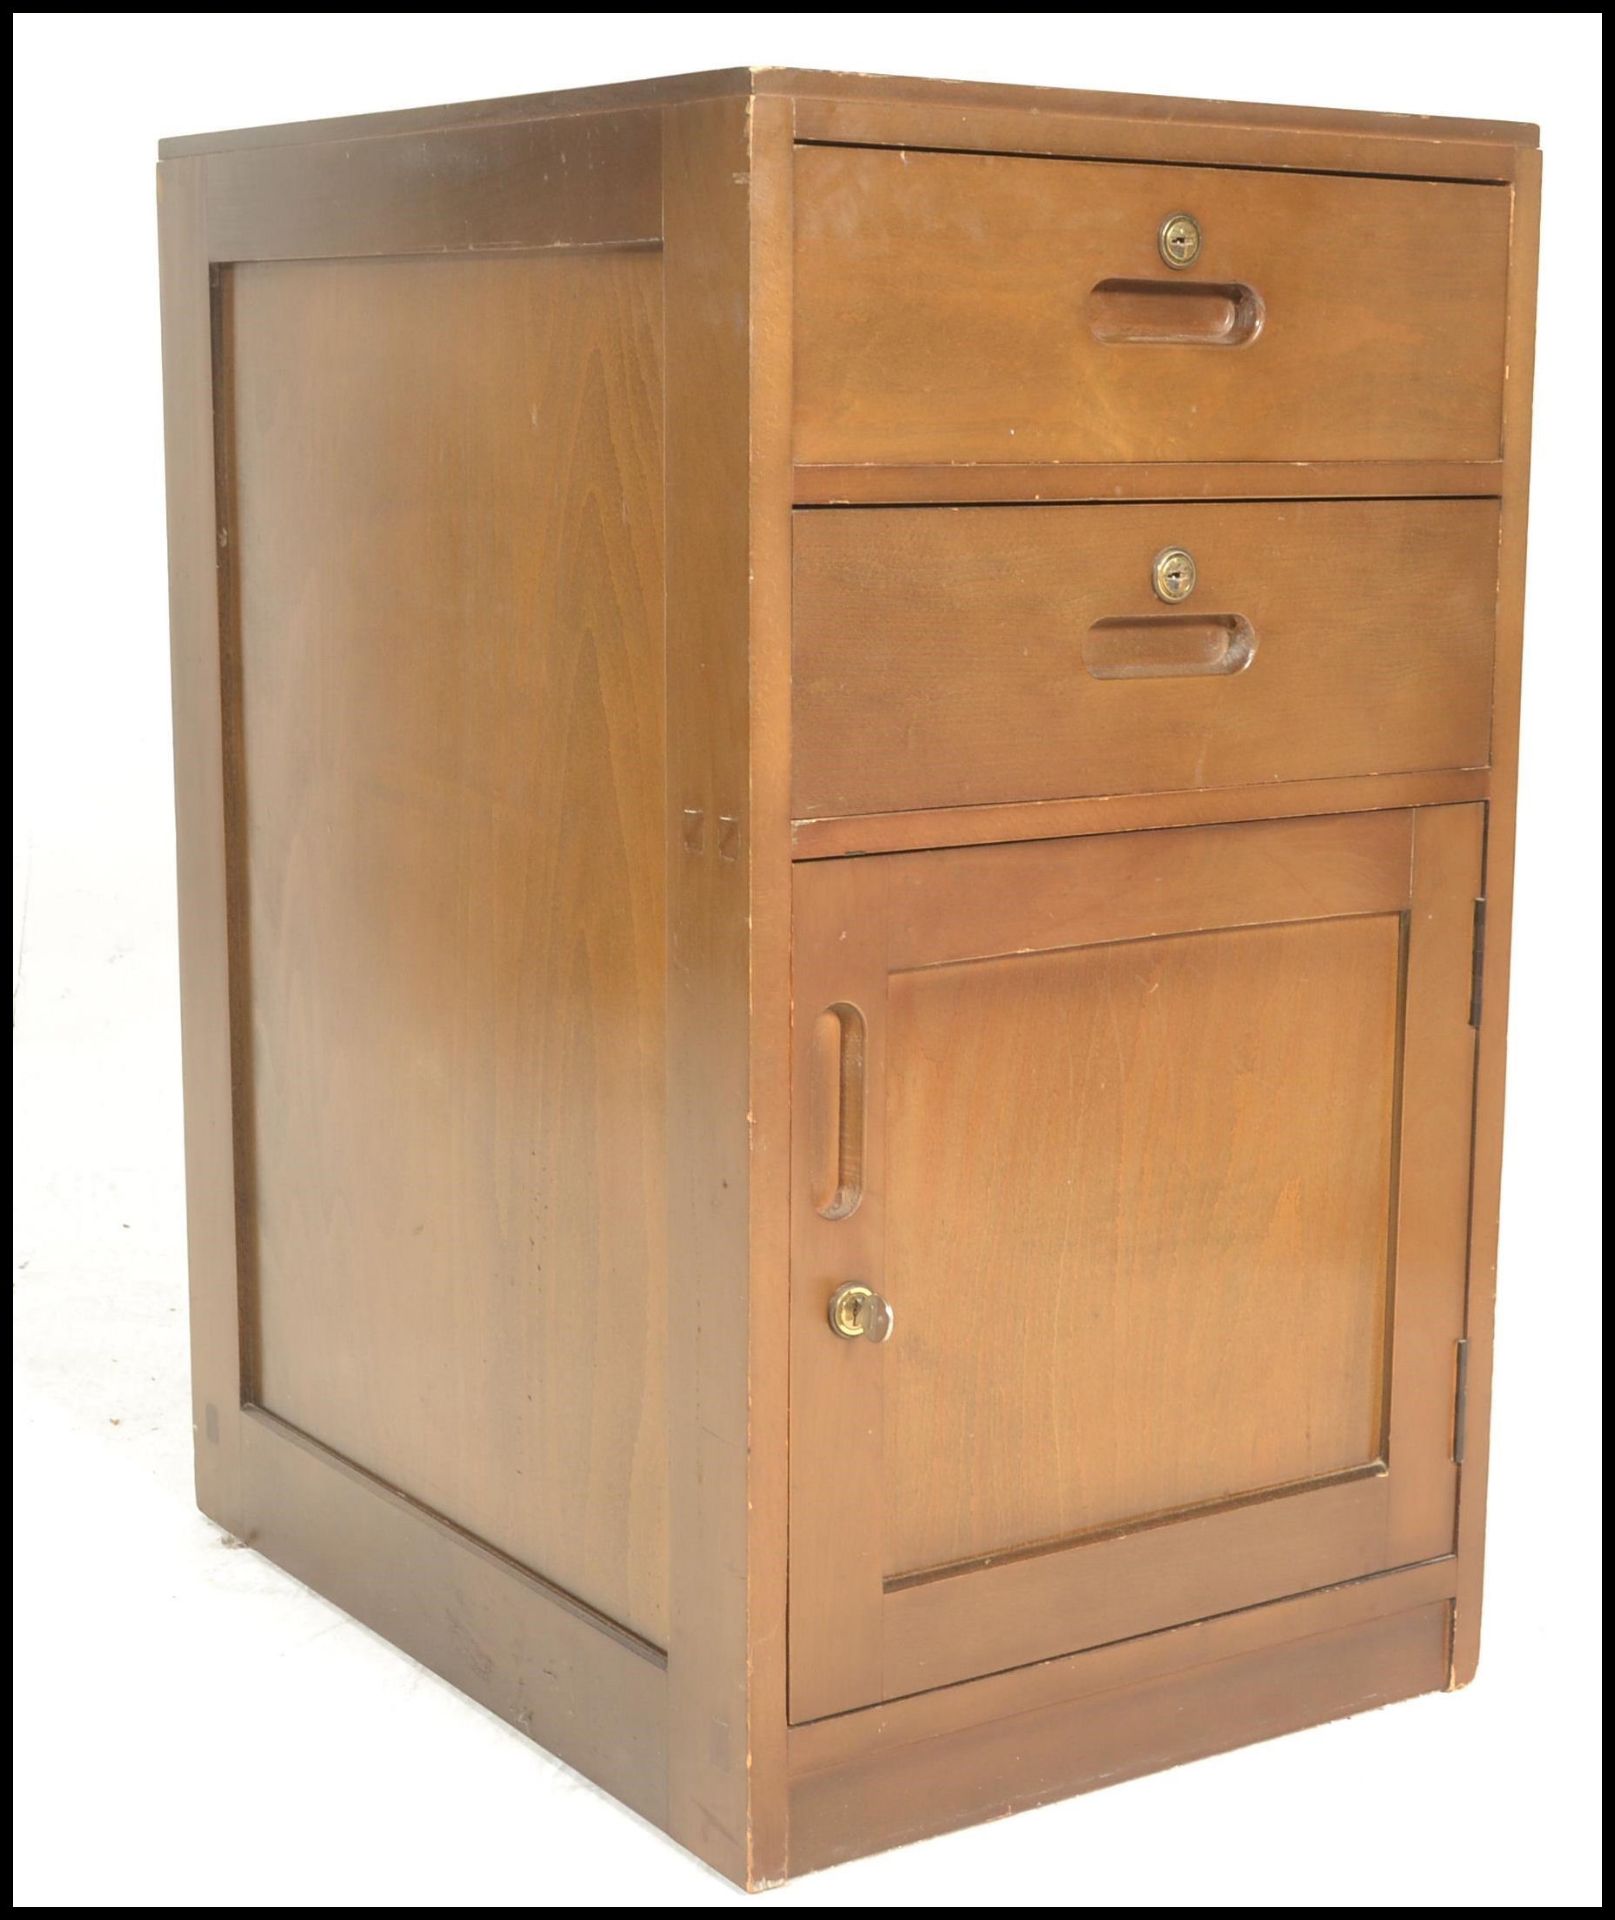 A 20th Century Air Ministry bedside locker, flared top over twin drawers with recessed handles and